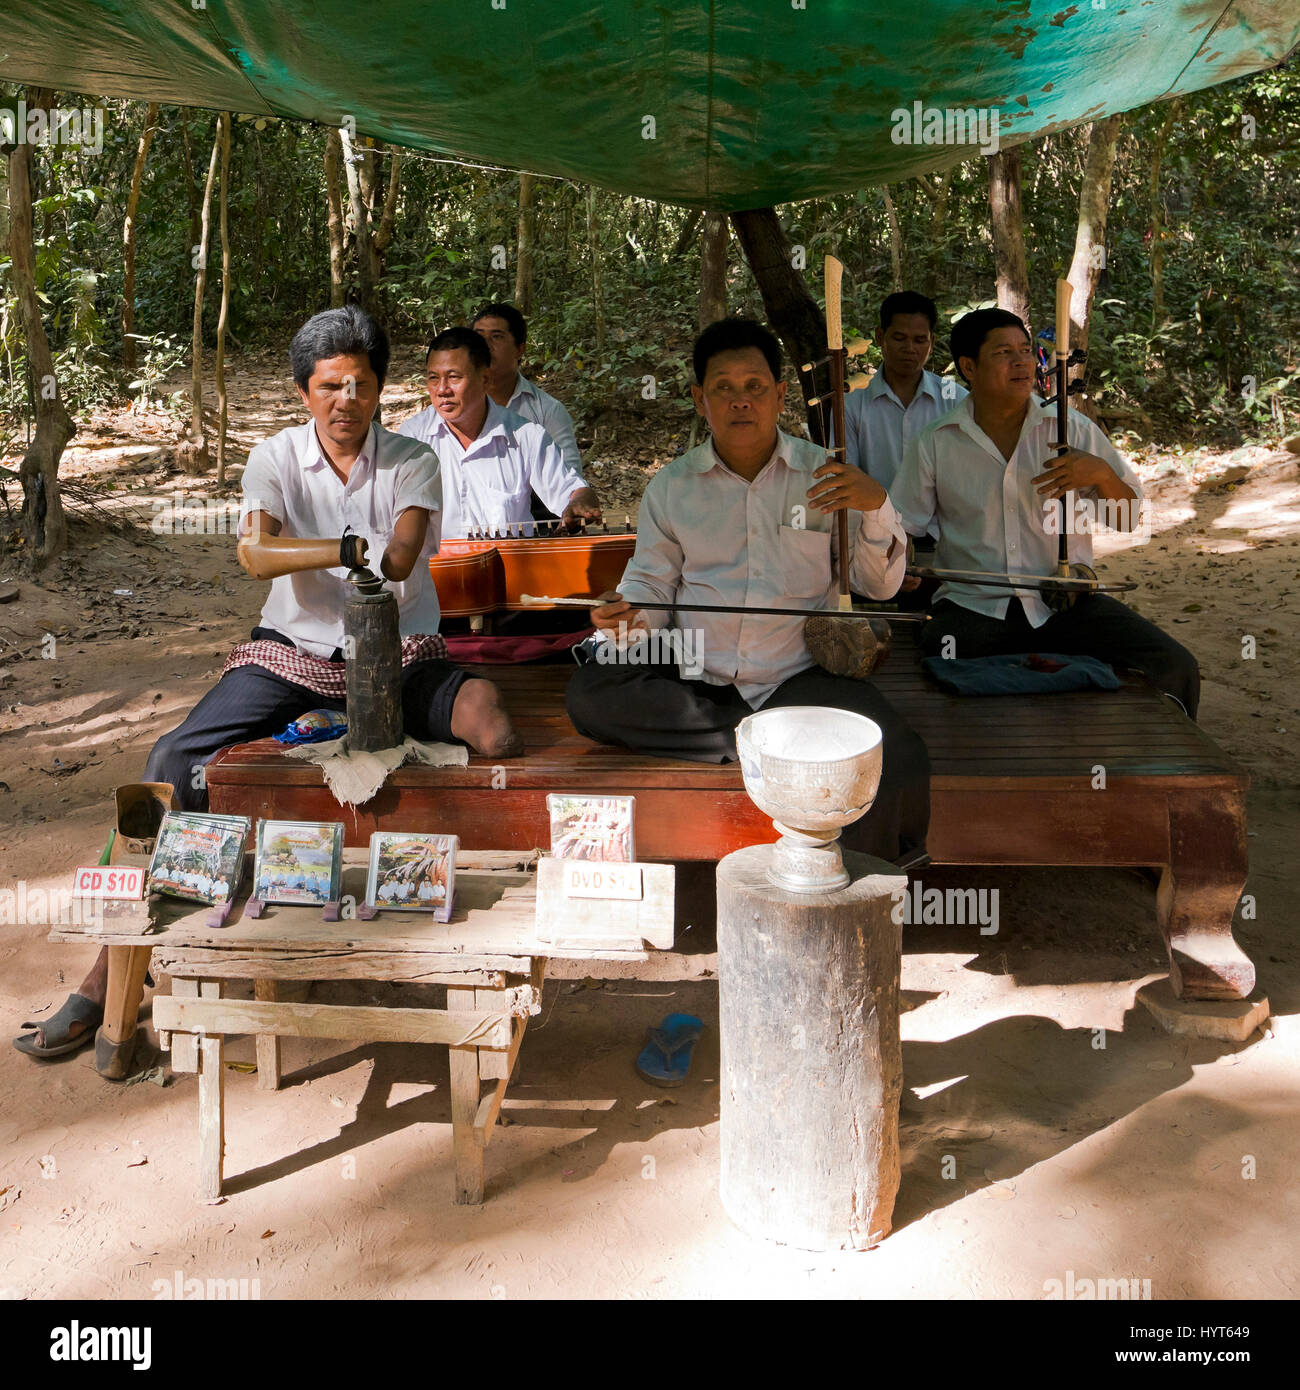 Square portrait of musicians playing traditional musical instruments in Cambodia Stock Photo